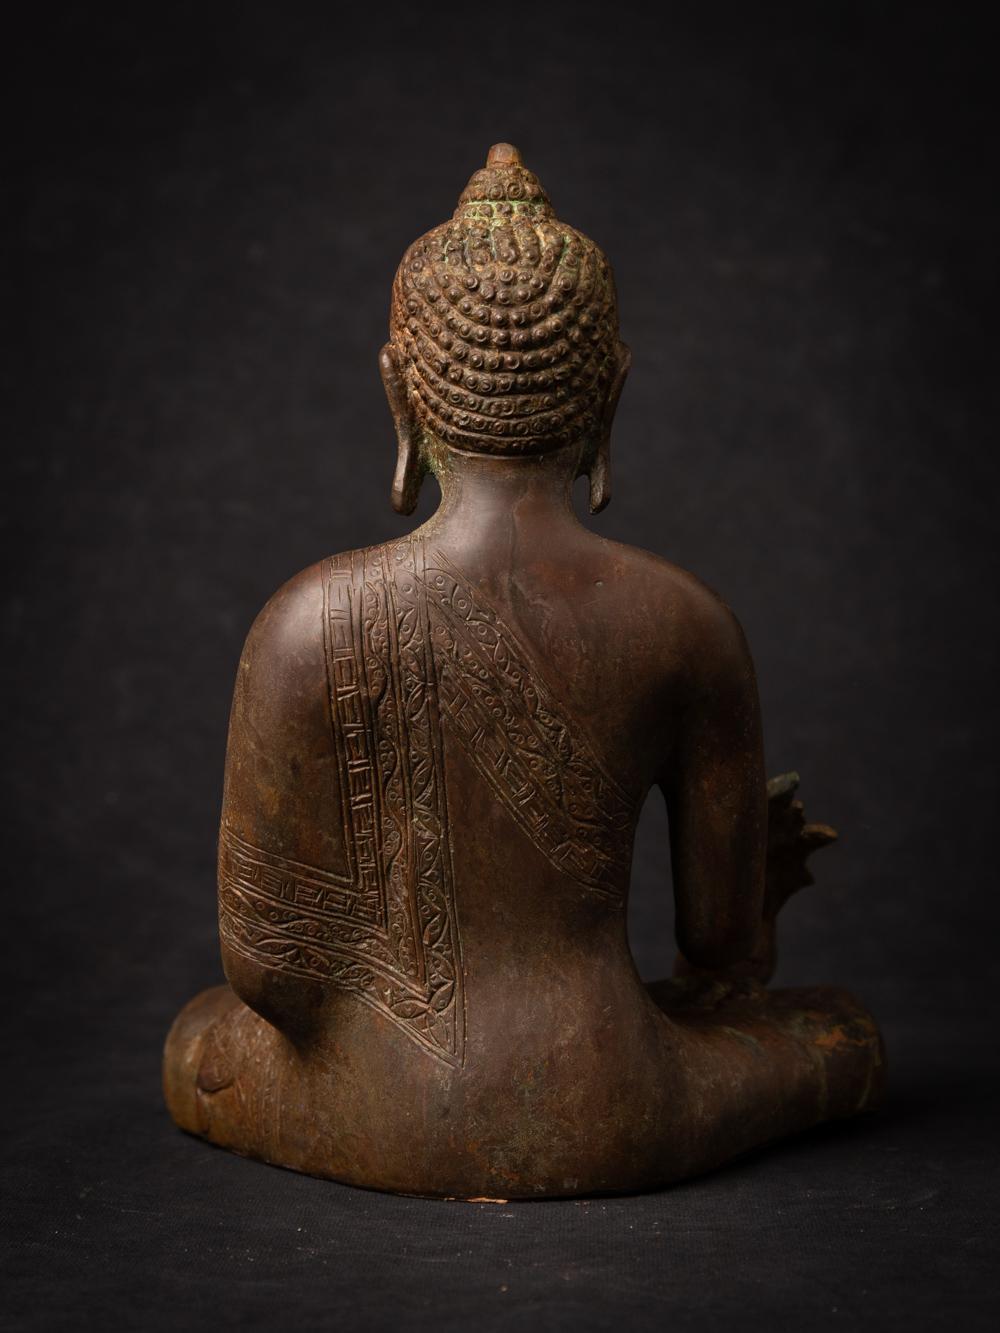 Bronze Nepali Medicine Buddha statue
Material : bronze
21,8 cm high
16,7 cm wide and 12,5 cm deep
Recently made - not antique
Weight: 2,76 kgs
Originating from Nepal
Nr: 3649-14

Nepali Medicine Buddha statue is very popular among all the Buddha